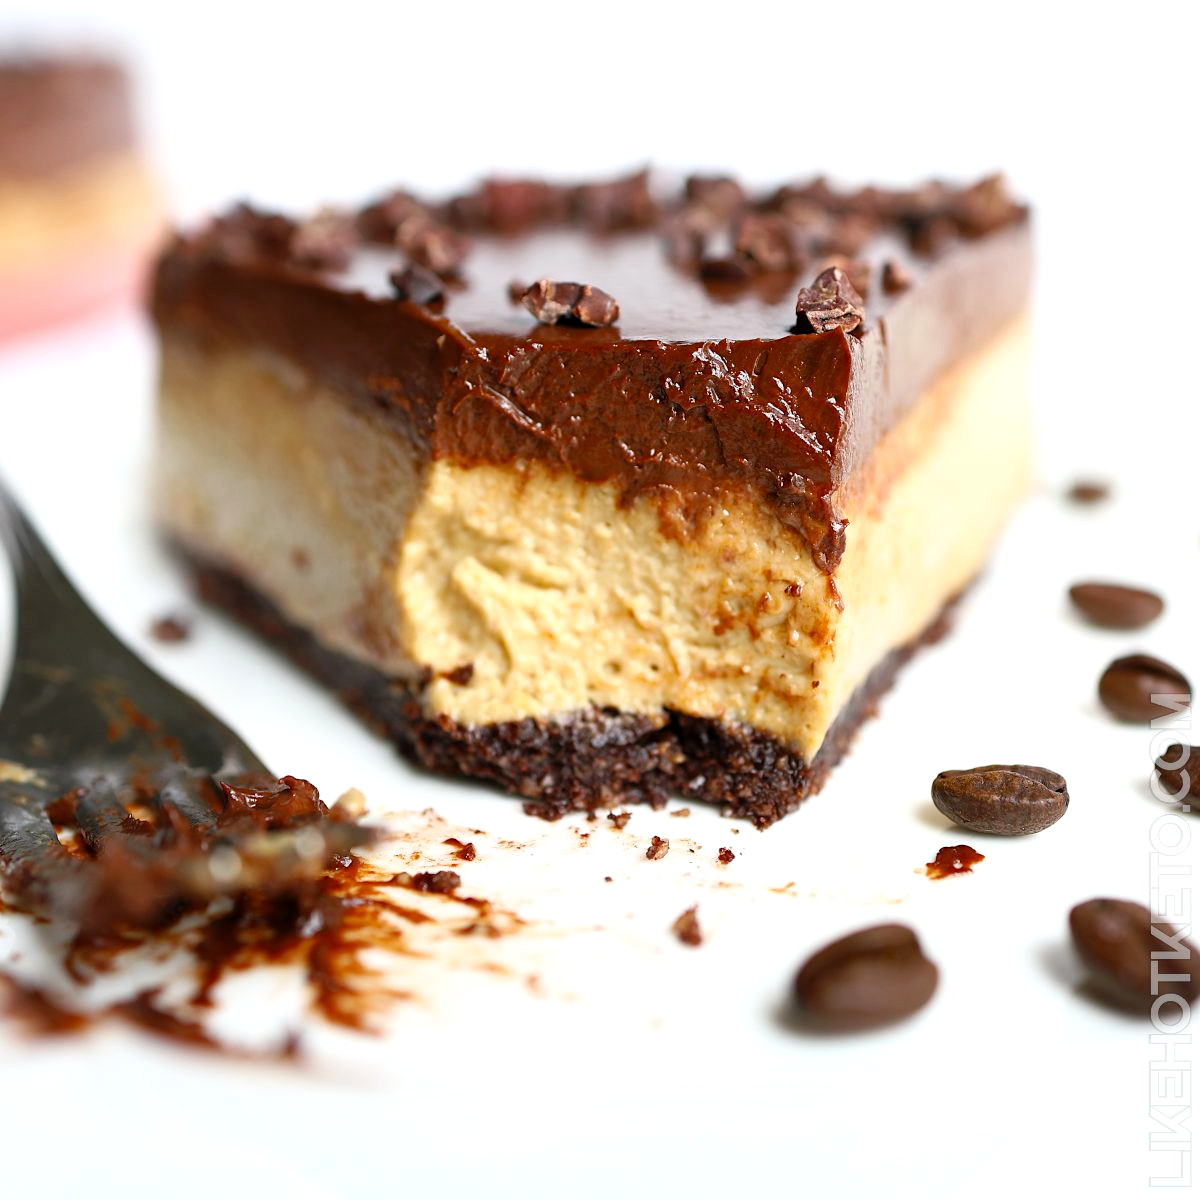 Slice of mocha coffee cheesecake topped with a thick layer of creamy chocolate ganache, with a bite taken of by a fork, resting on the side.